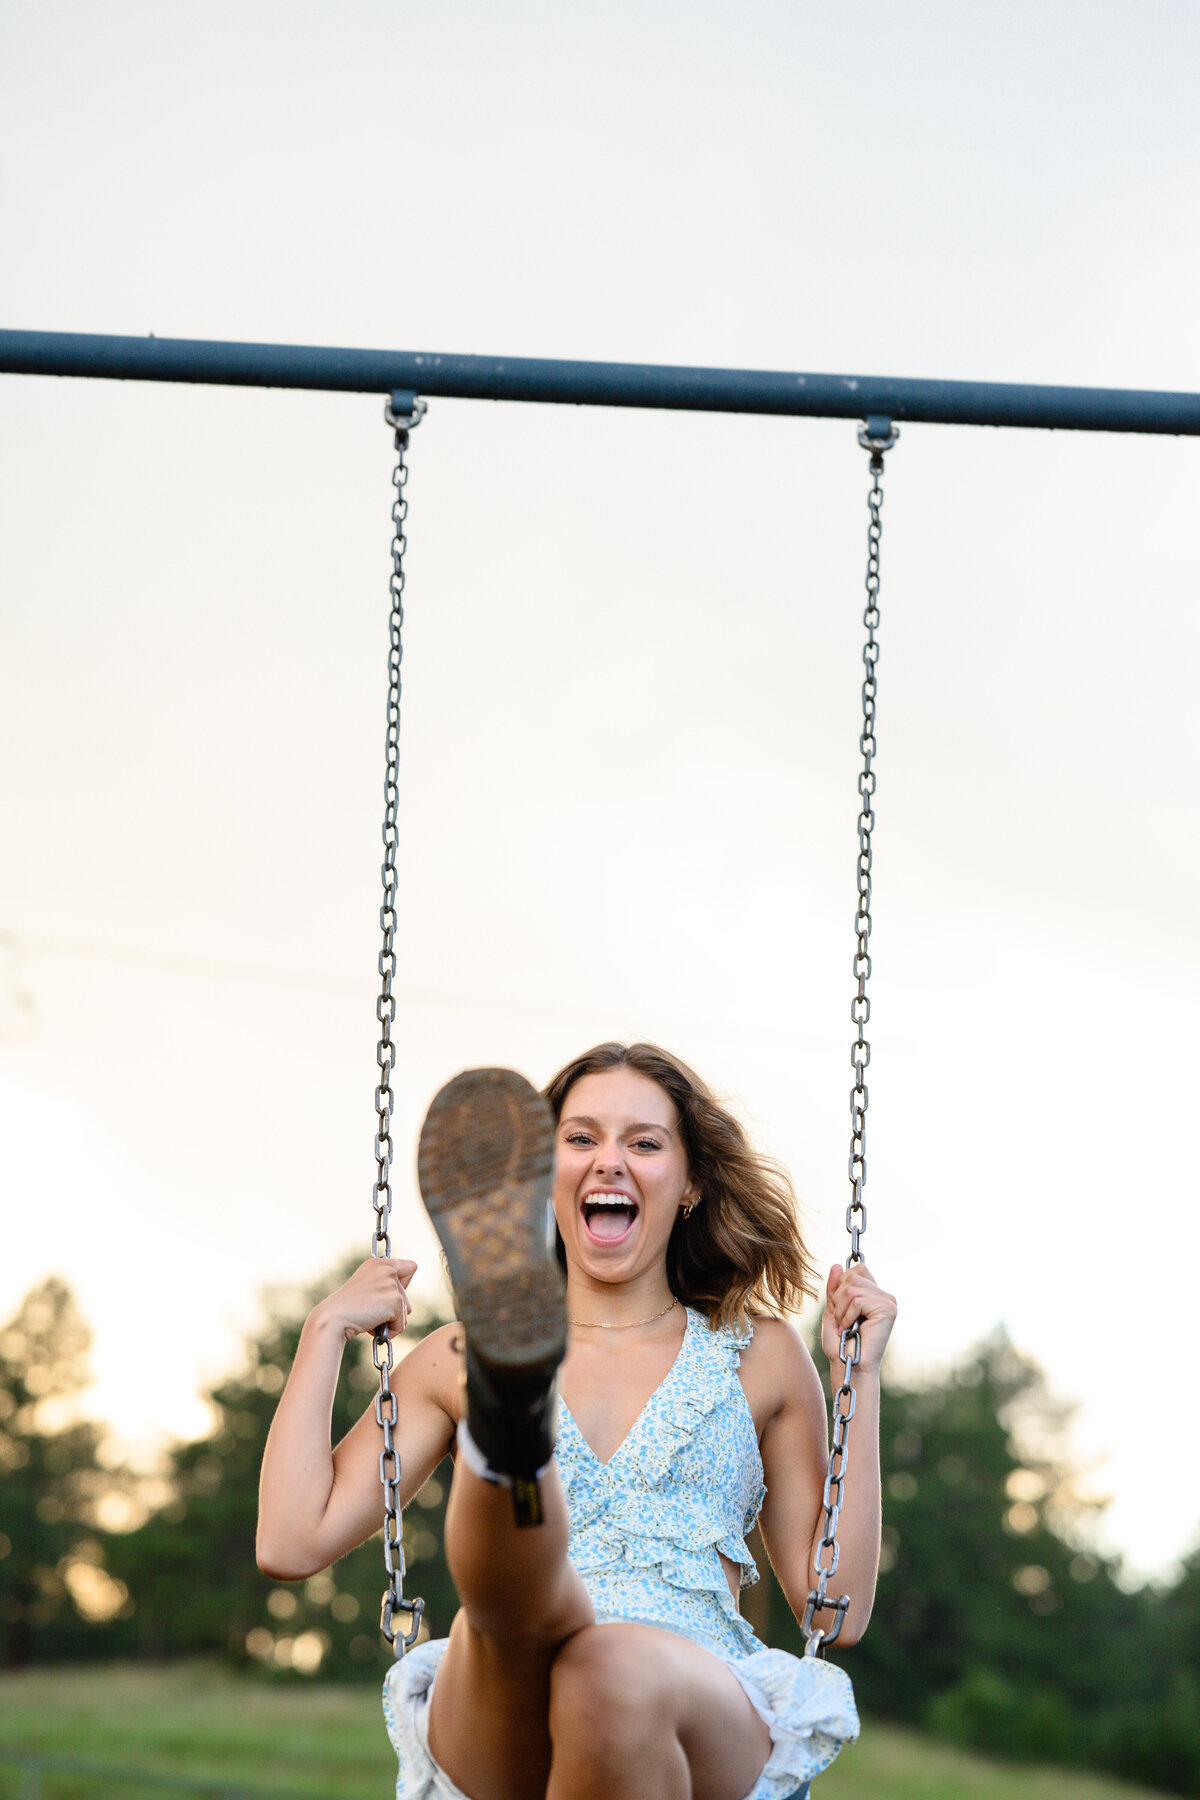 Fun senior pictures of a girl with the sun setting behind her while on a swing laughing with her foot extended